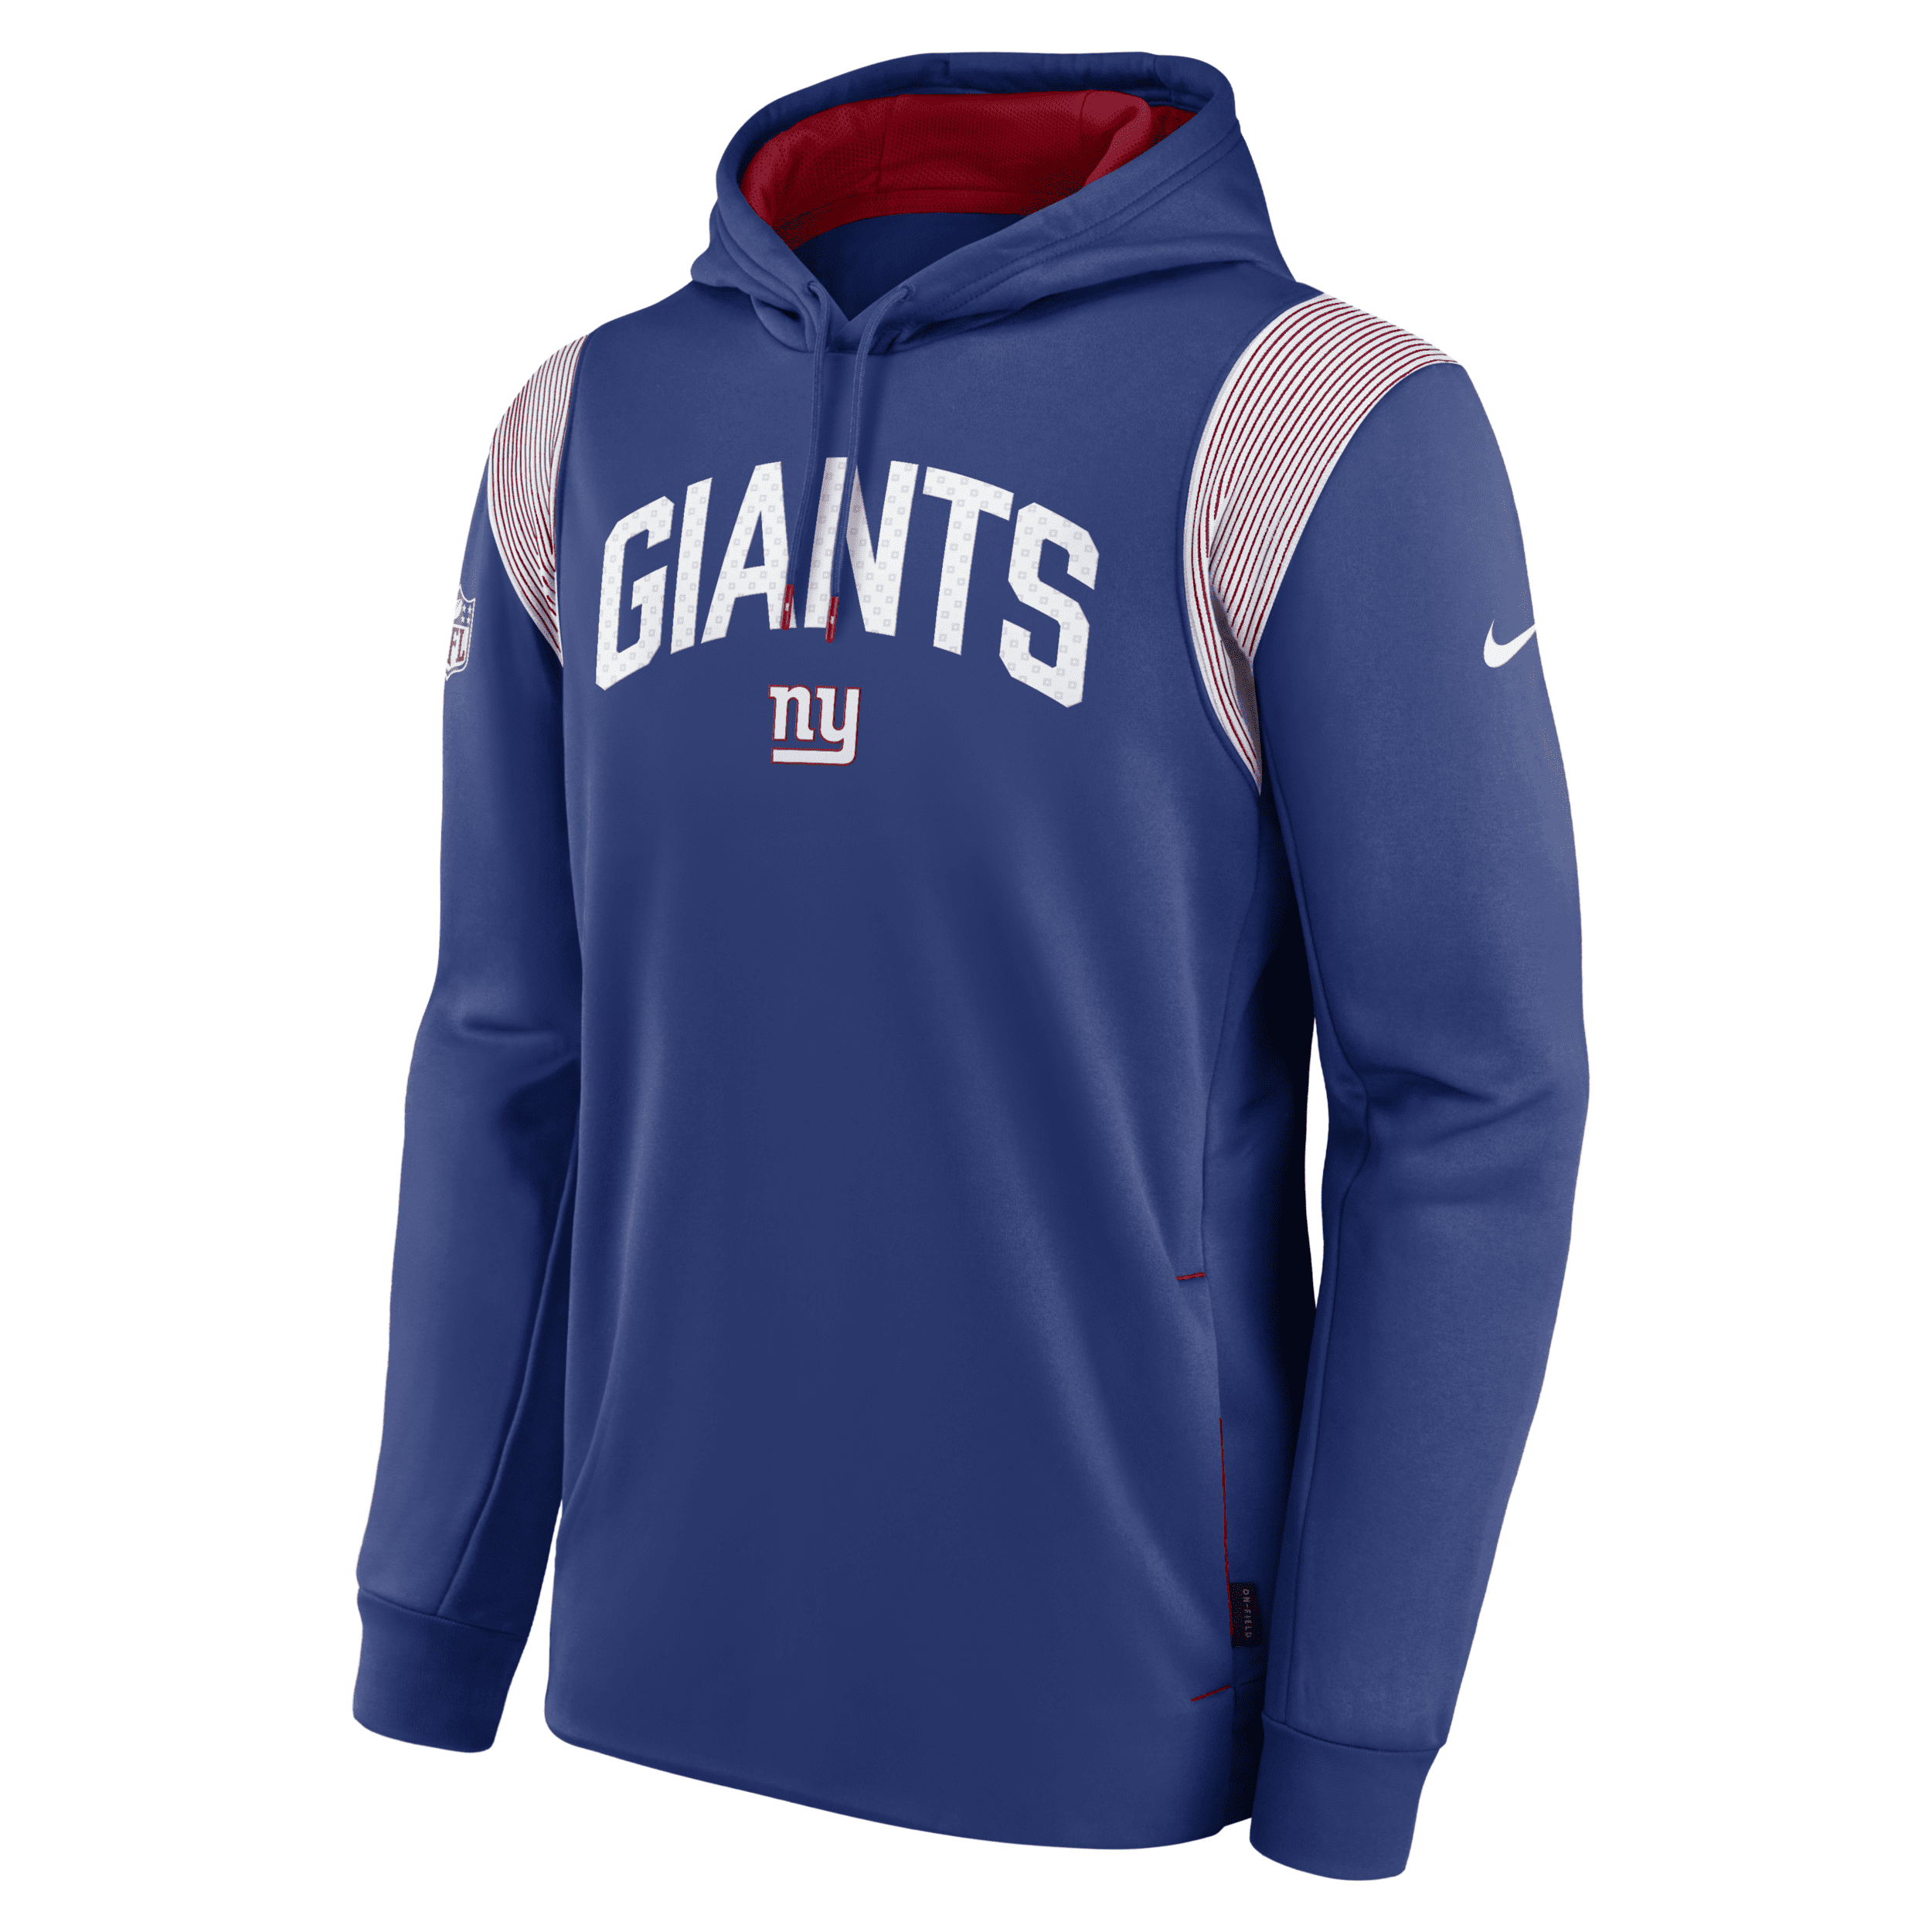 Nike Men's New York Giants Sideline Therma-FIT Pullover Hoodie - Blue - S Each